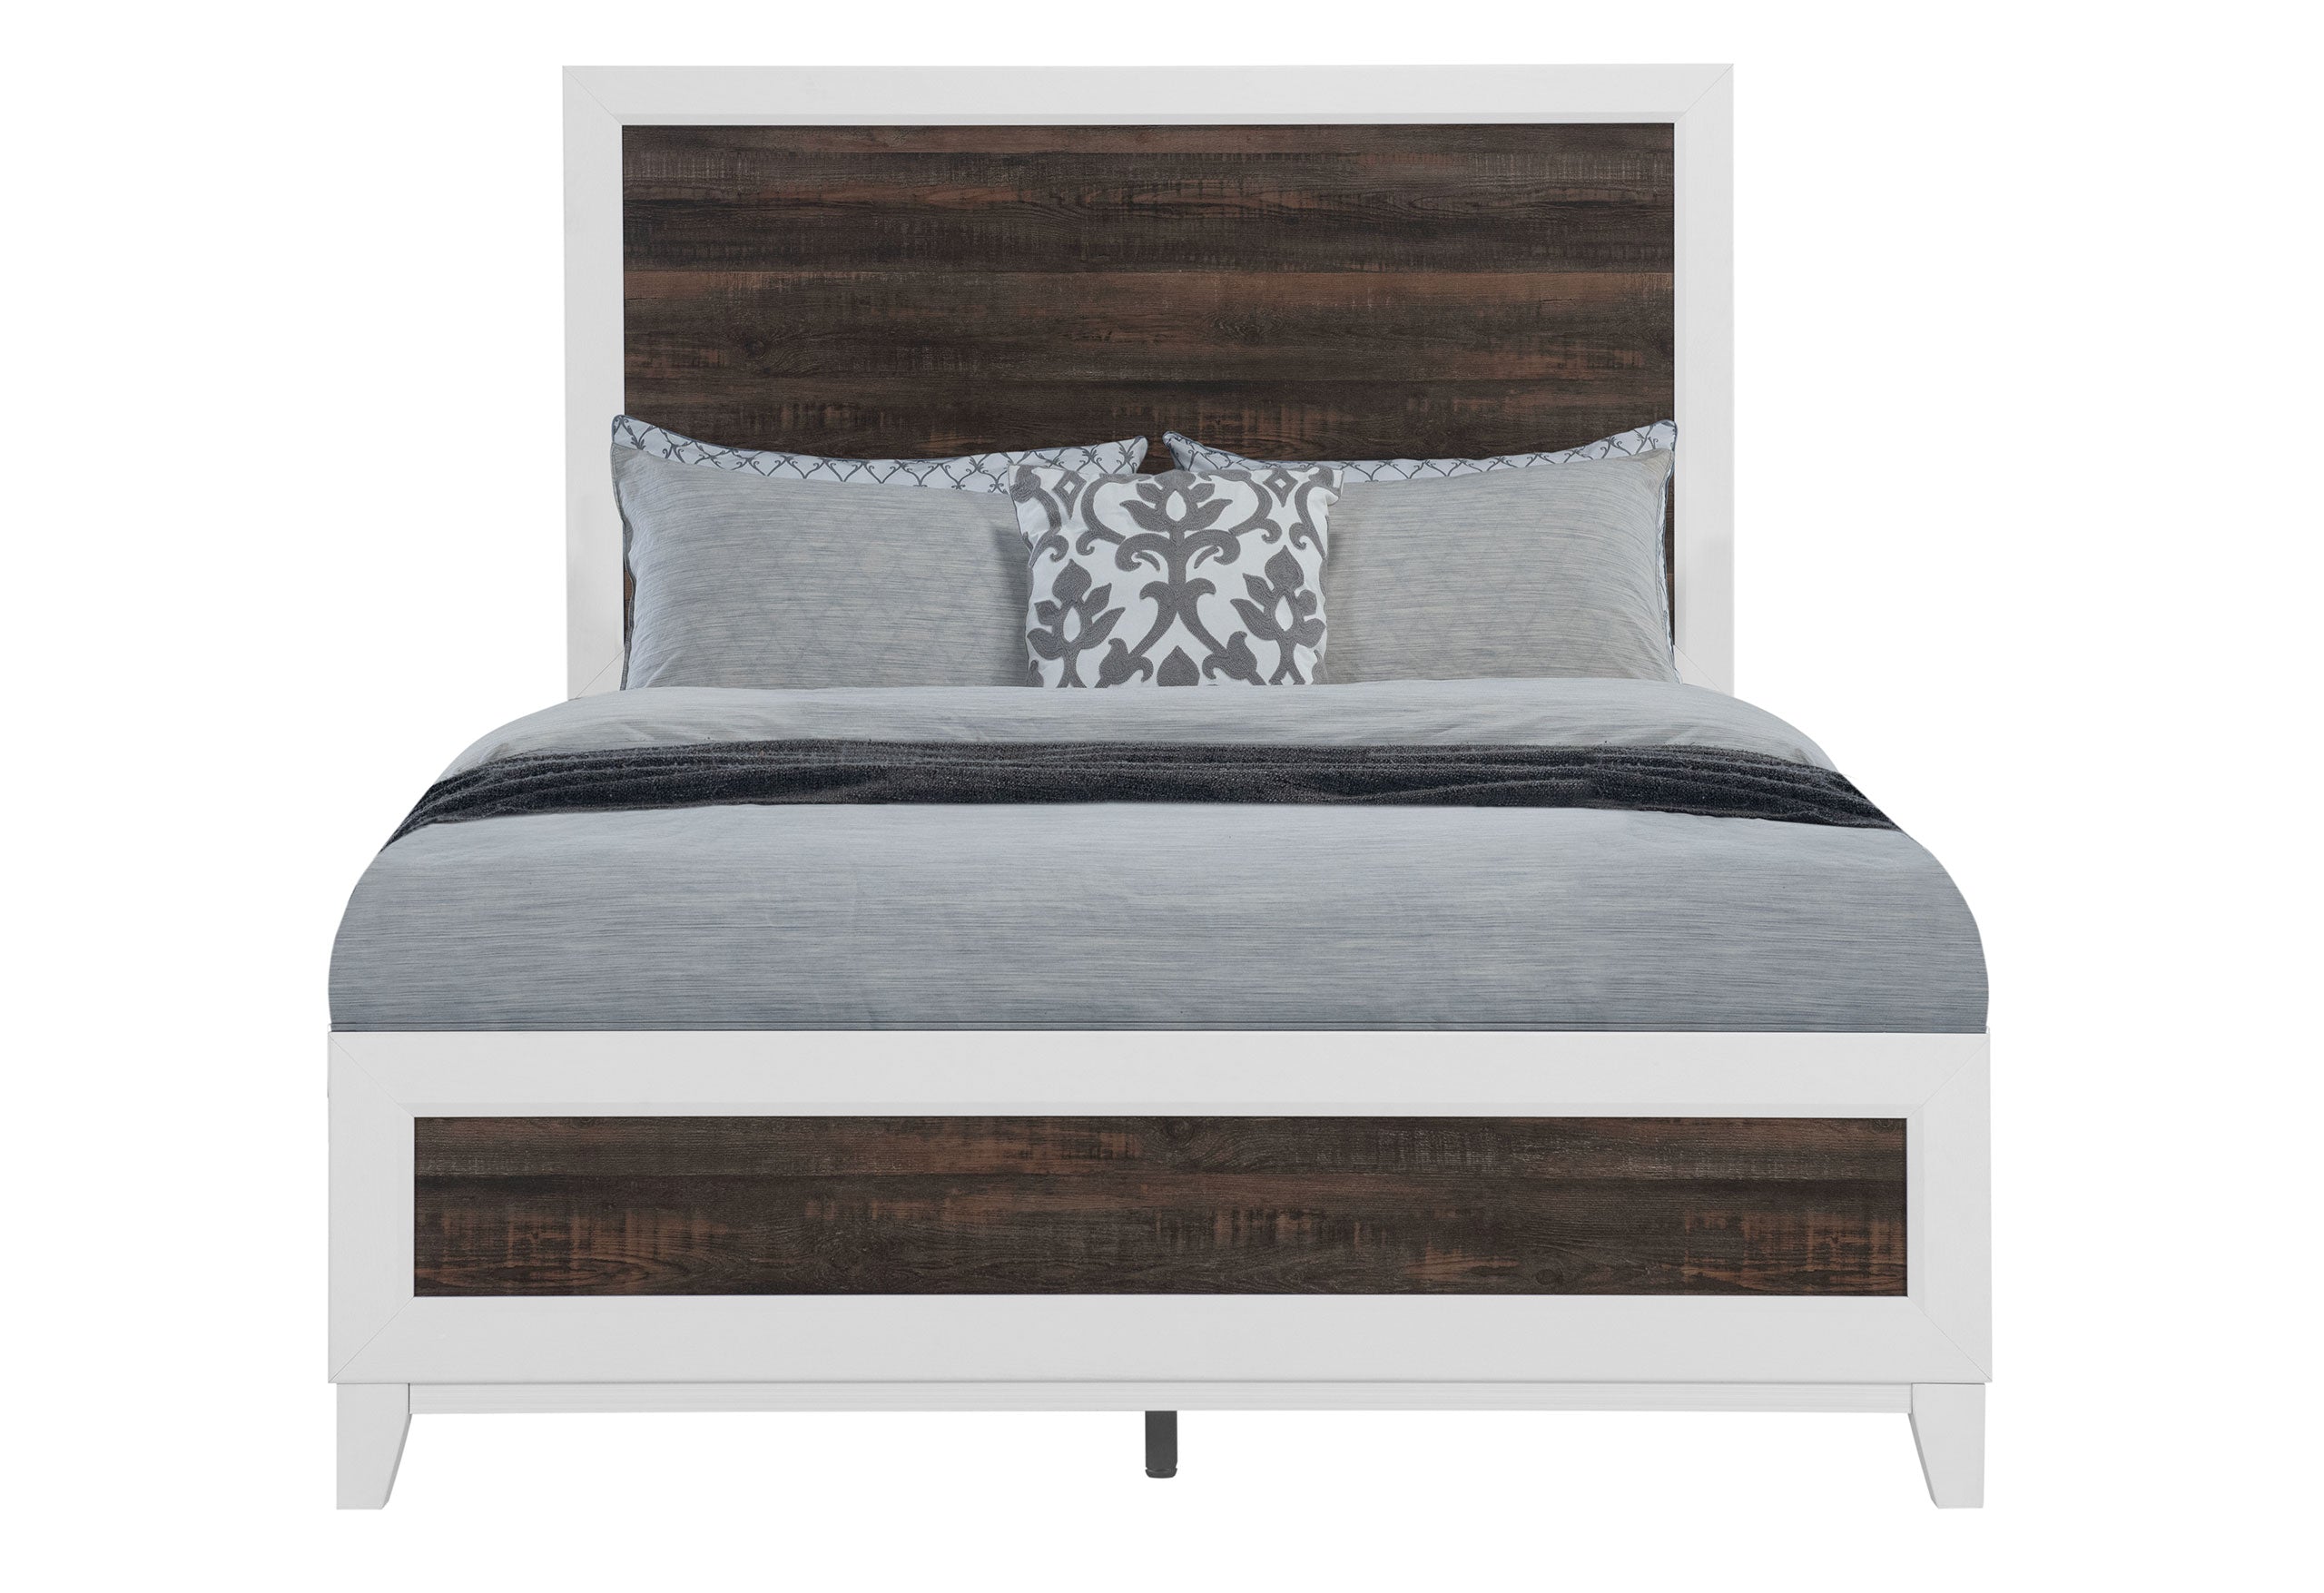 LISBON - FULL BED, KING BED, QUEEN BED, TWIN BED, FULL BED, KING BED, QUEEN BED, TWIN BED